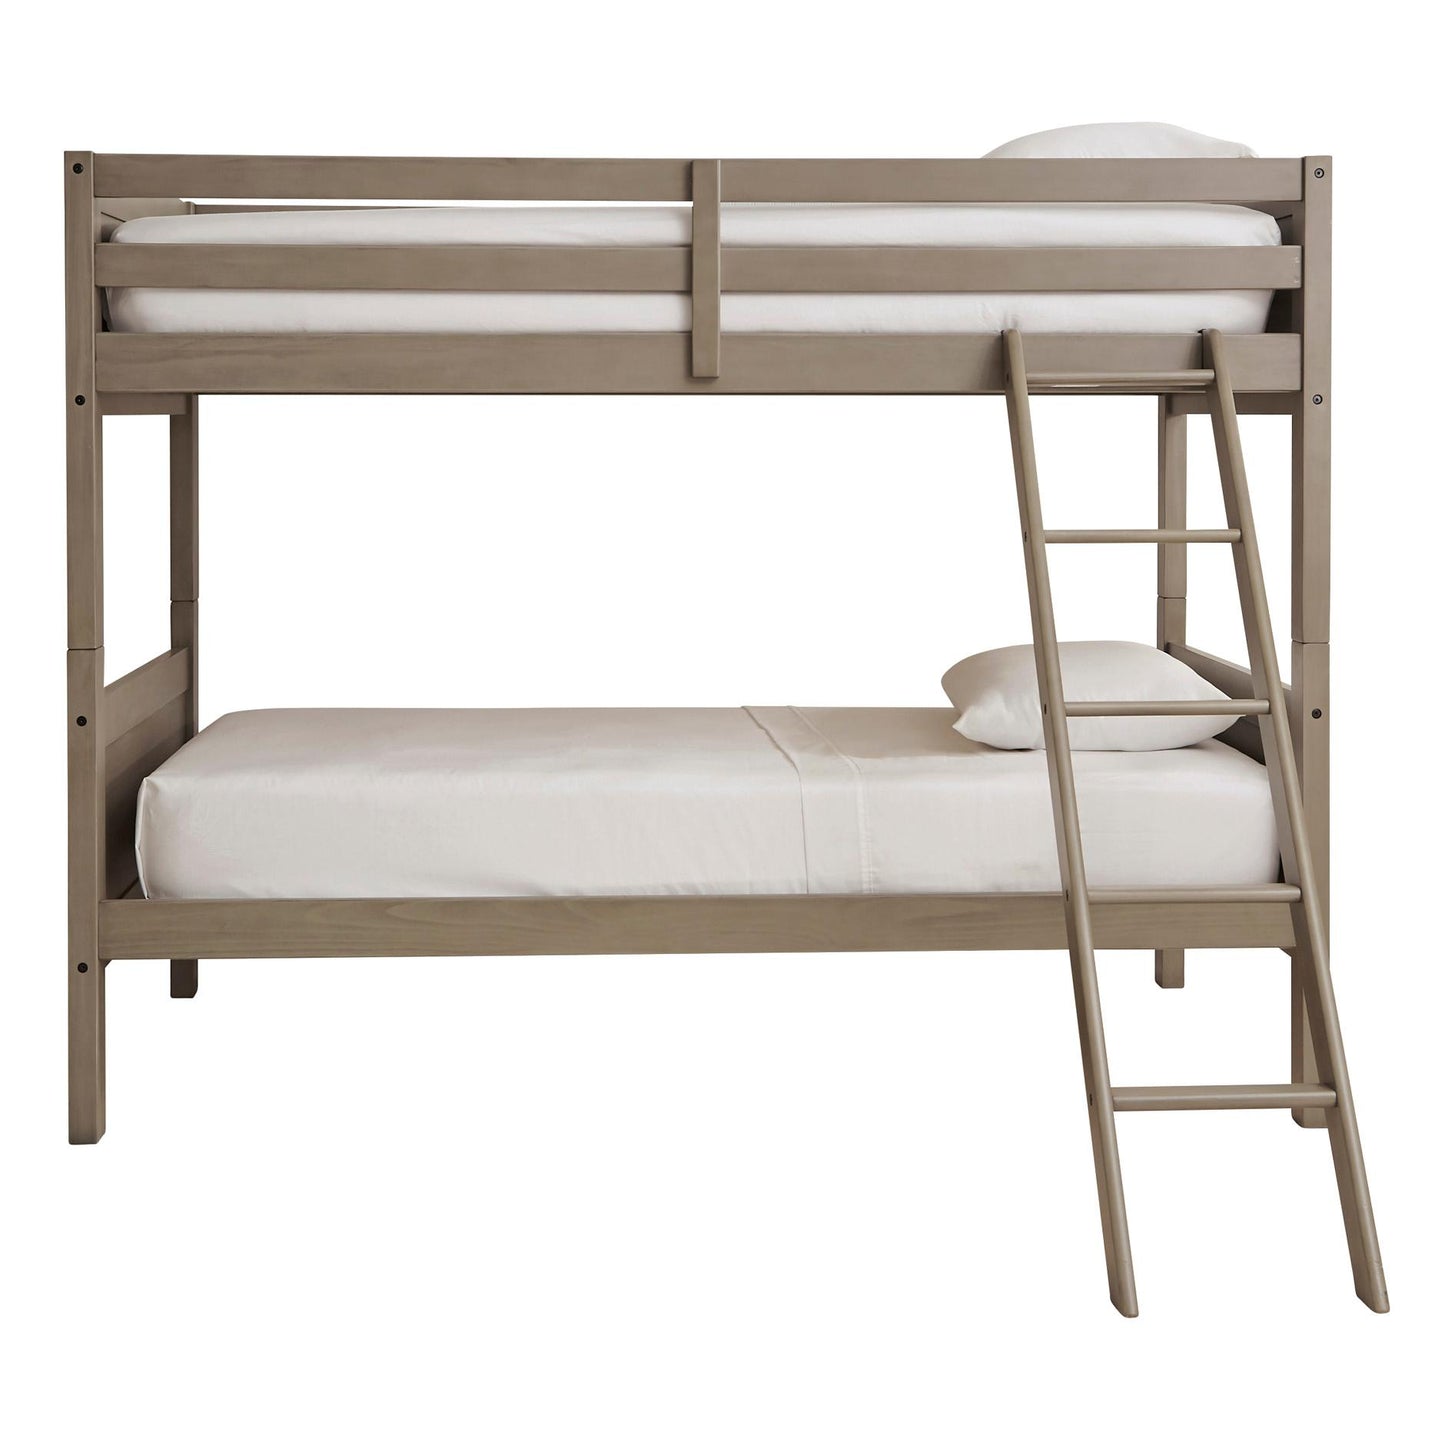 Signature Design by Ashley Kids Beds Bunk Bed B733-59 IMAGE 2